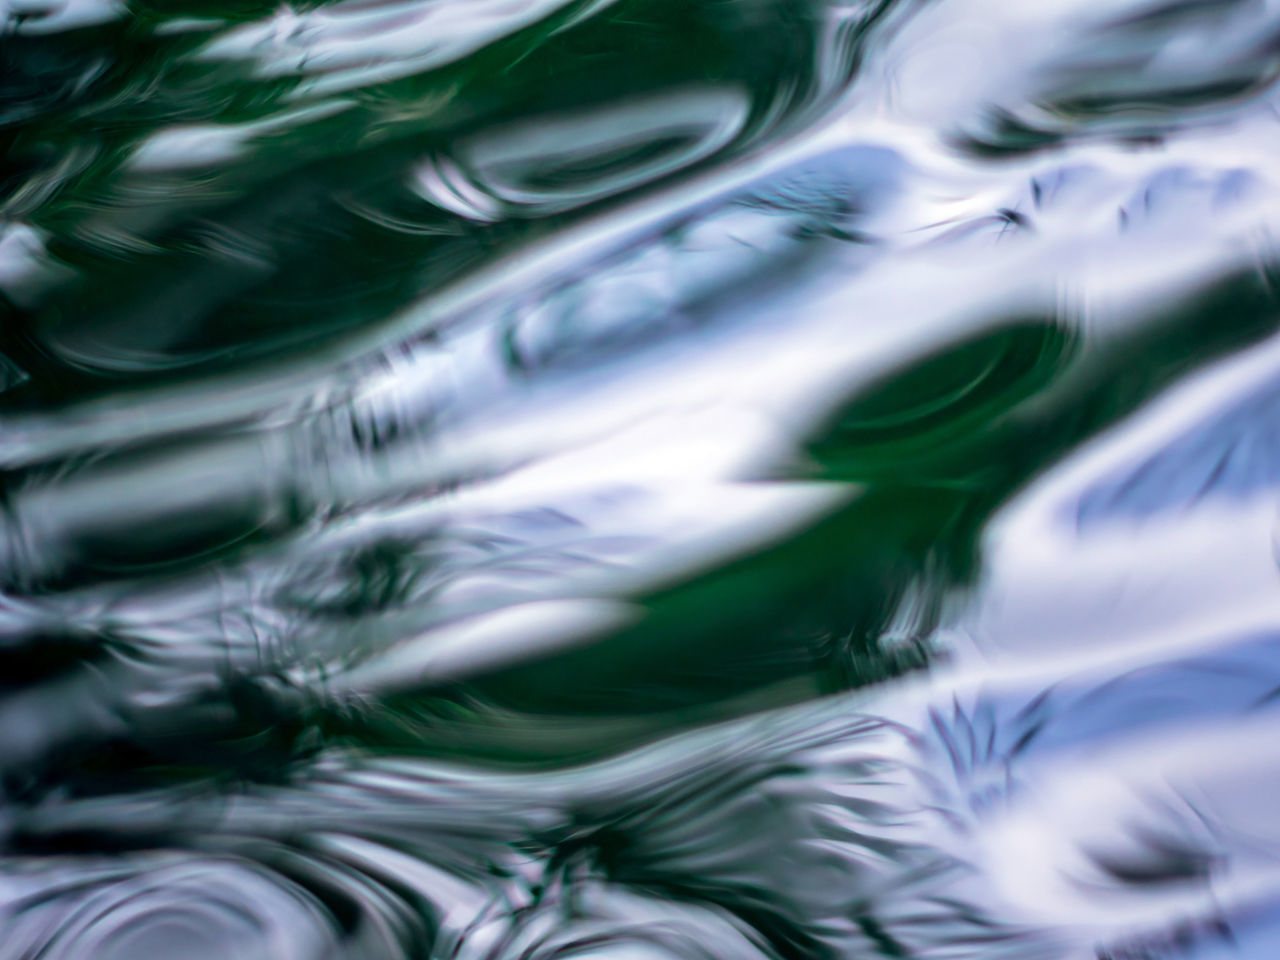 CLOSE-UP OF RIPPLED WATER